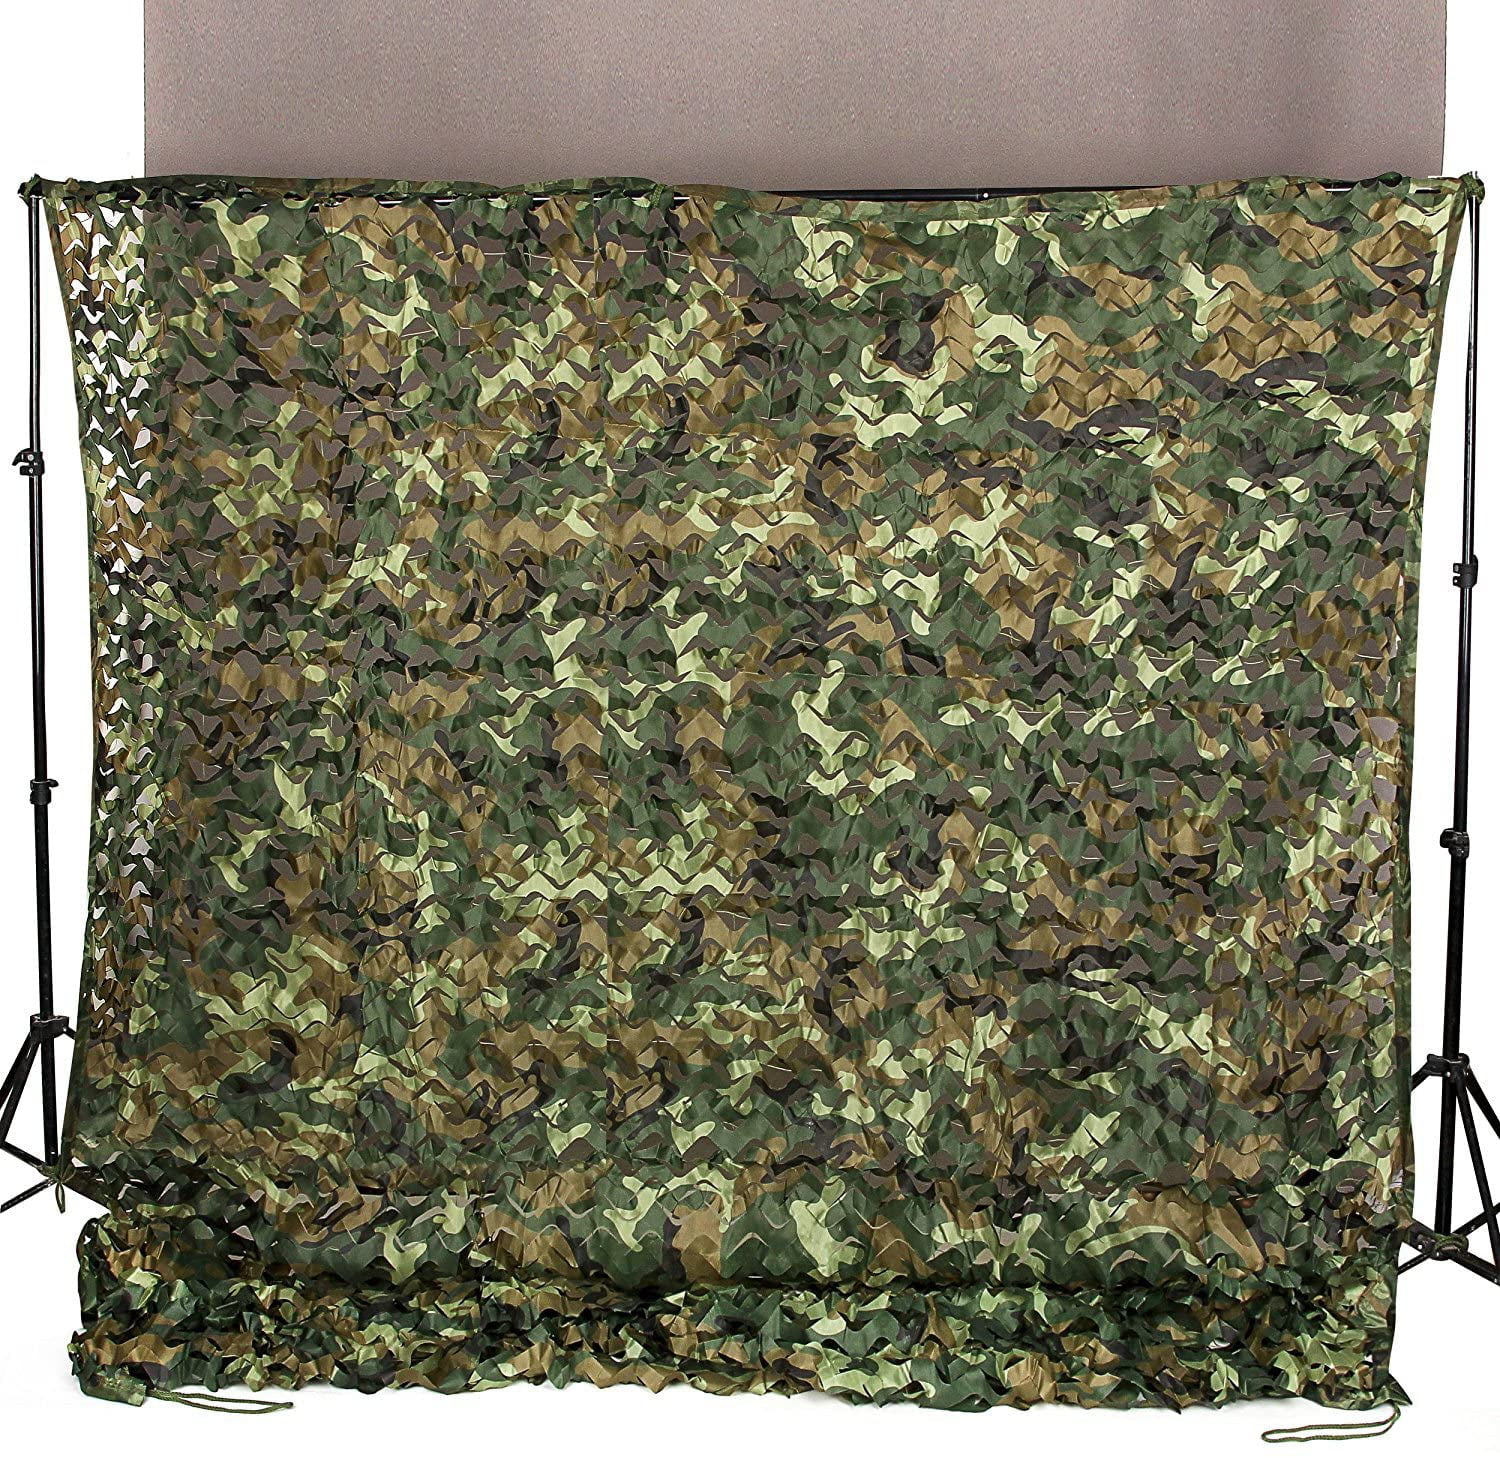 Woodland Camouflage Netting Military Army Camo Hunting Shooting Hide Cover Net H 